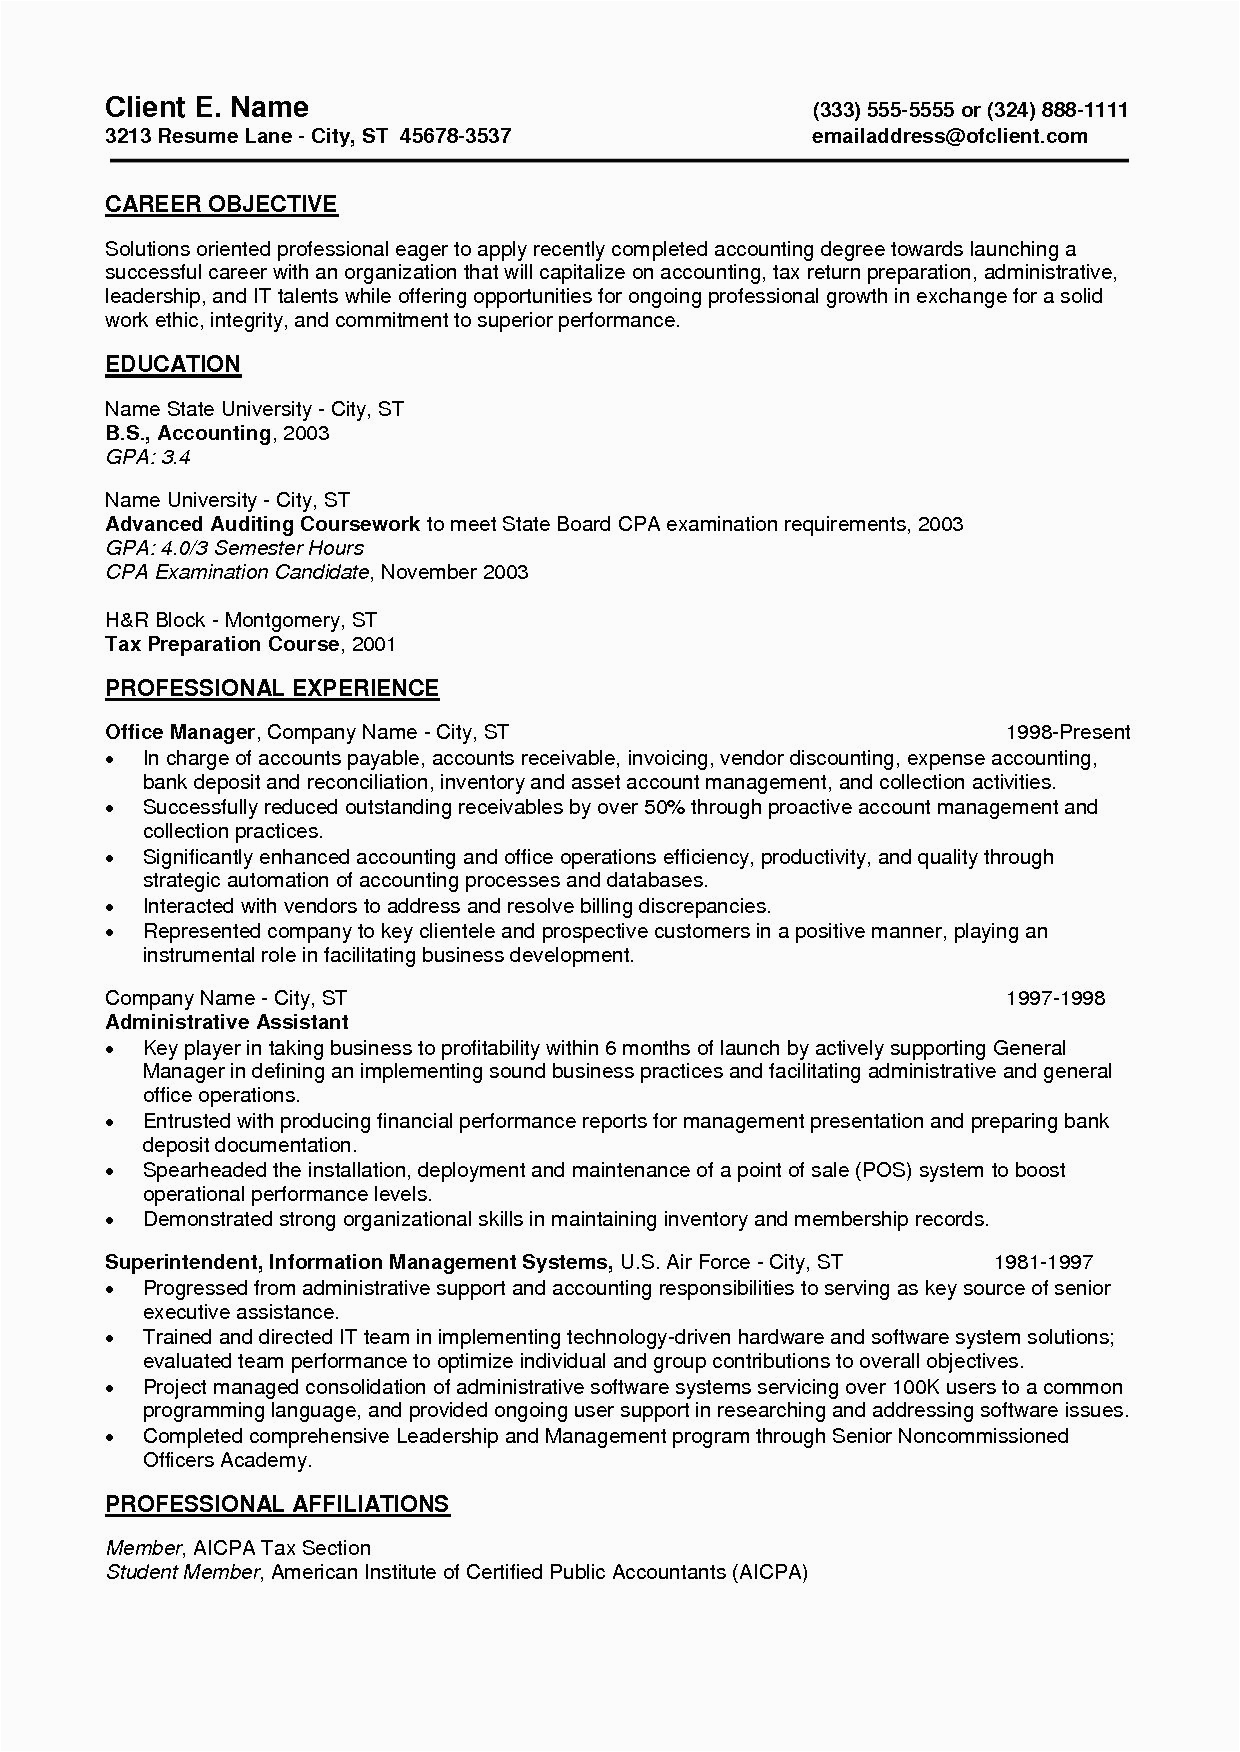 Sample Resume Objectives for Entry Level Jobs Entry Level Resume Example Entry Level Job Resume Examples